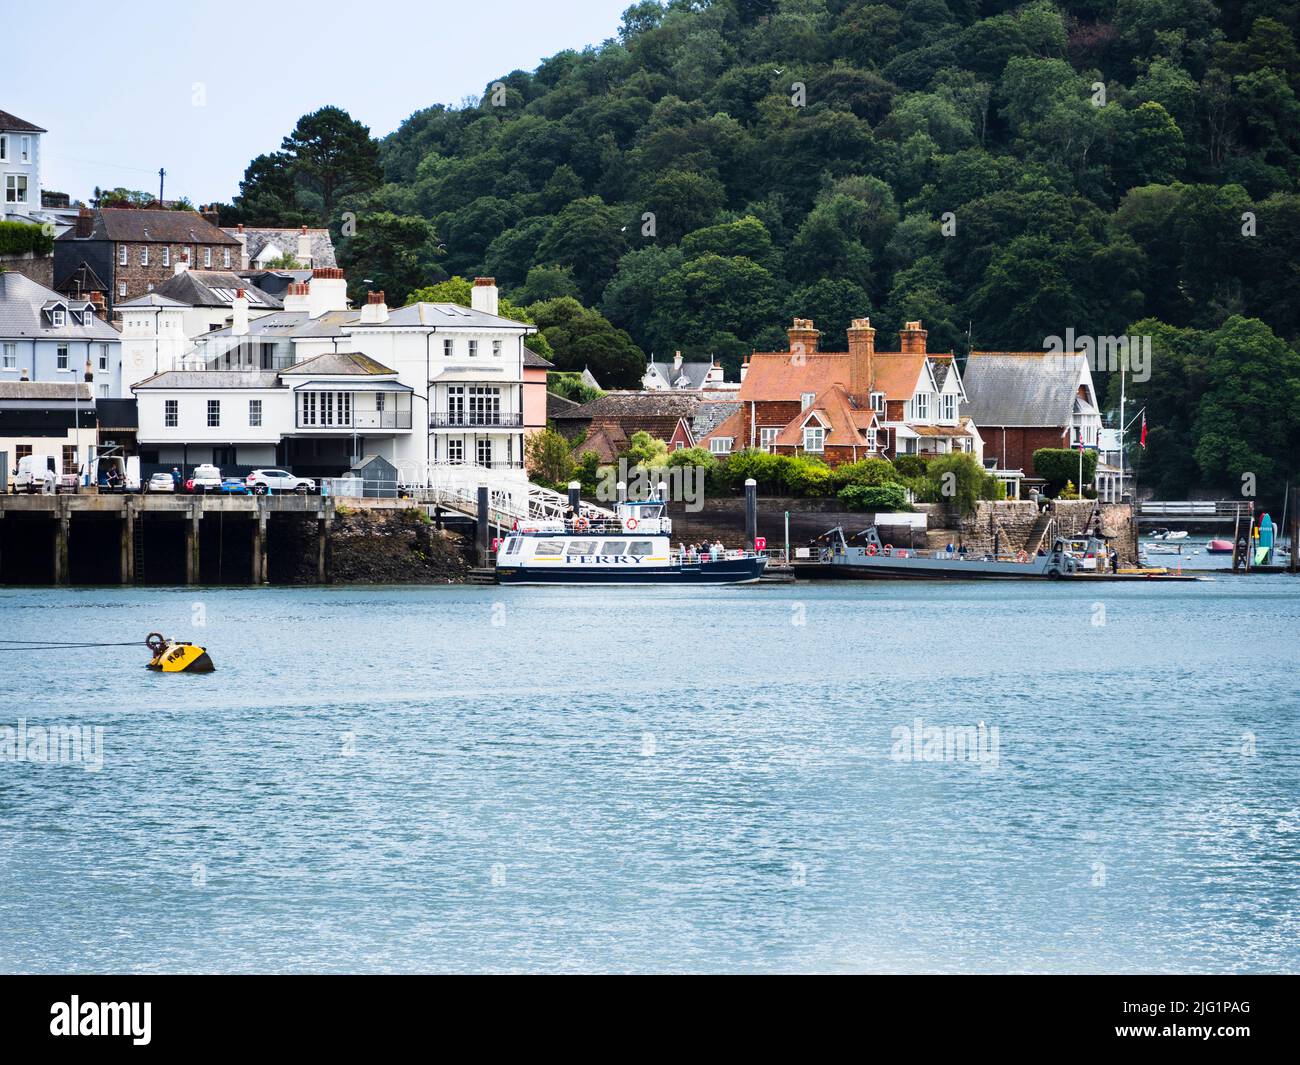 Tug guided lower car ferry and Dartmouth Princess passenger ferry at Kingswear for the trip across the River Dart to Dartmouth, Devon, UK Stock Photo